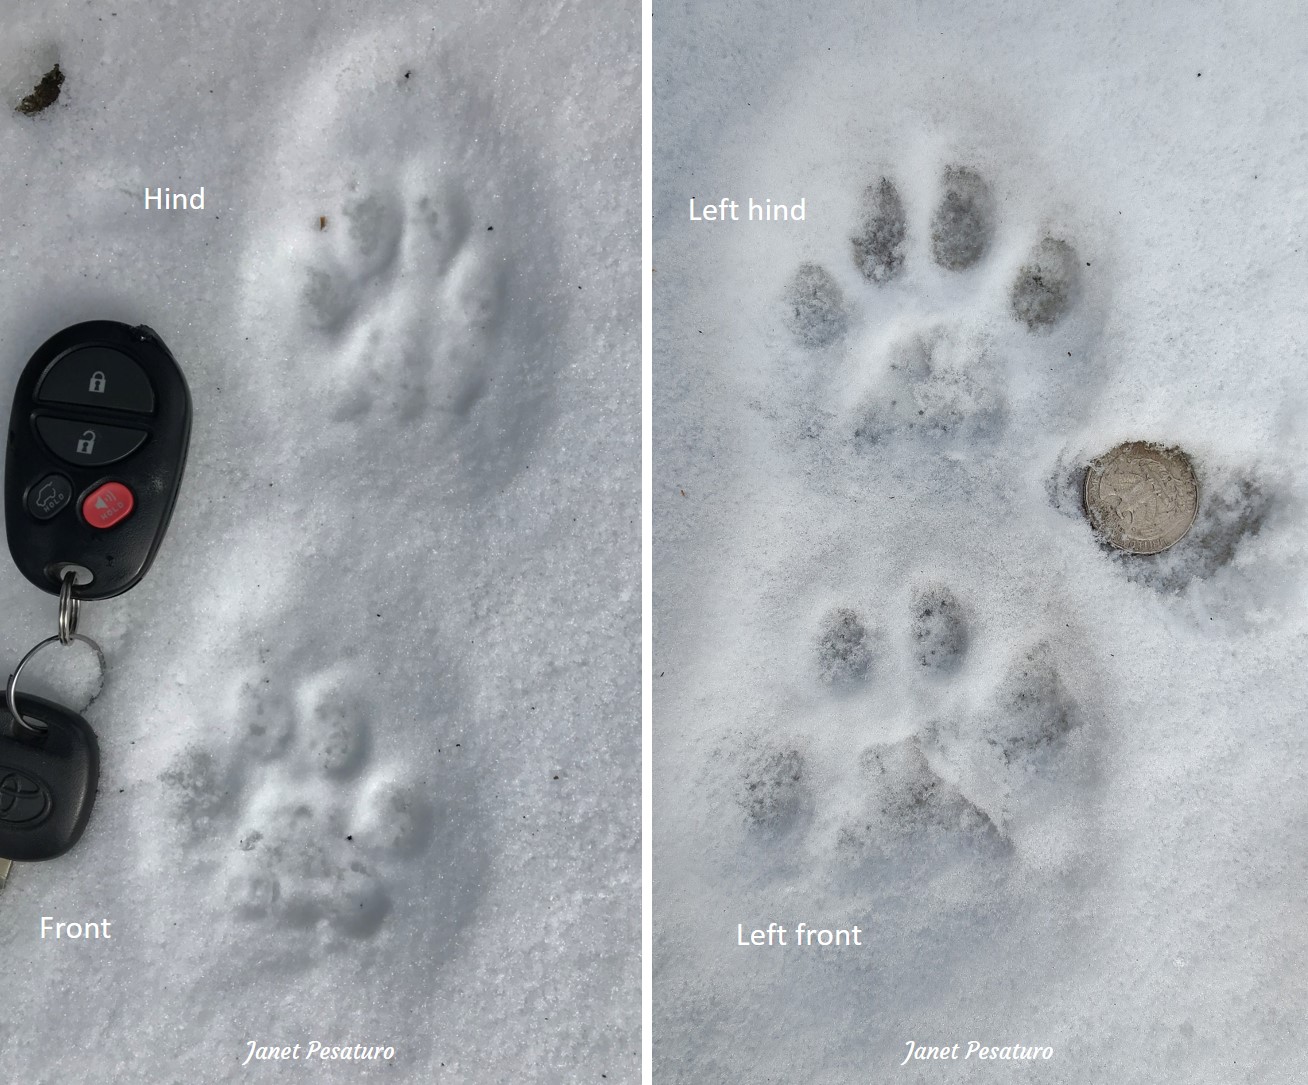 Examples of front and hind bobcat tracks